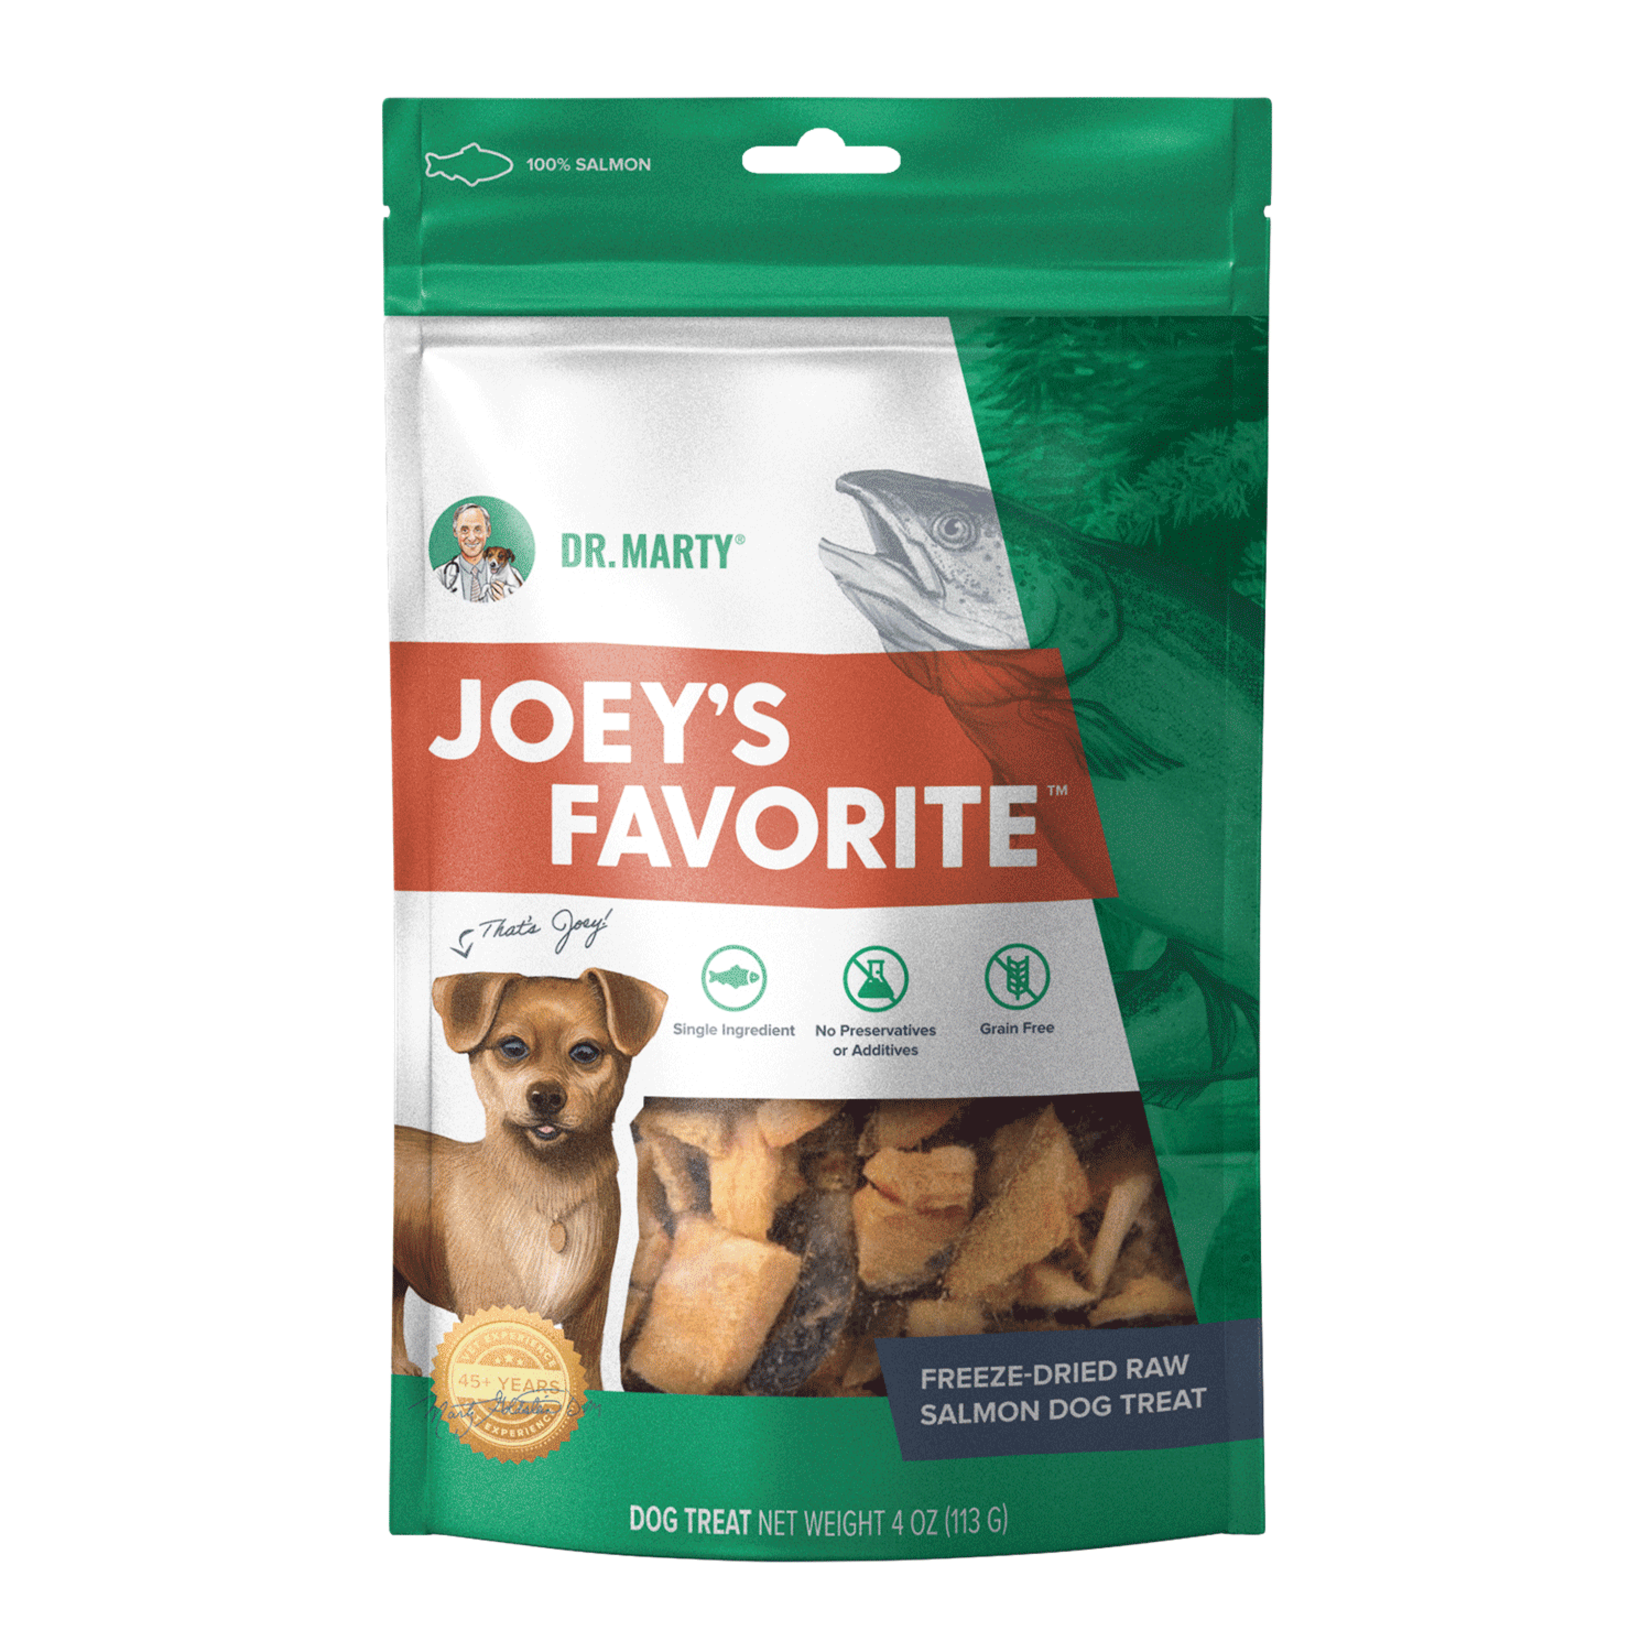 Dr. Marty Dr. Marty Joey's Favorite Freeze-Dried Raw Salmon Dog Treat